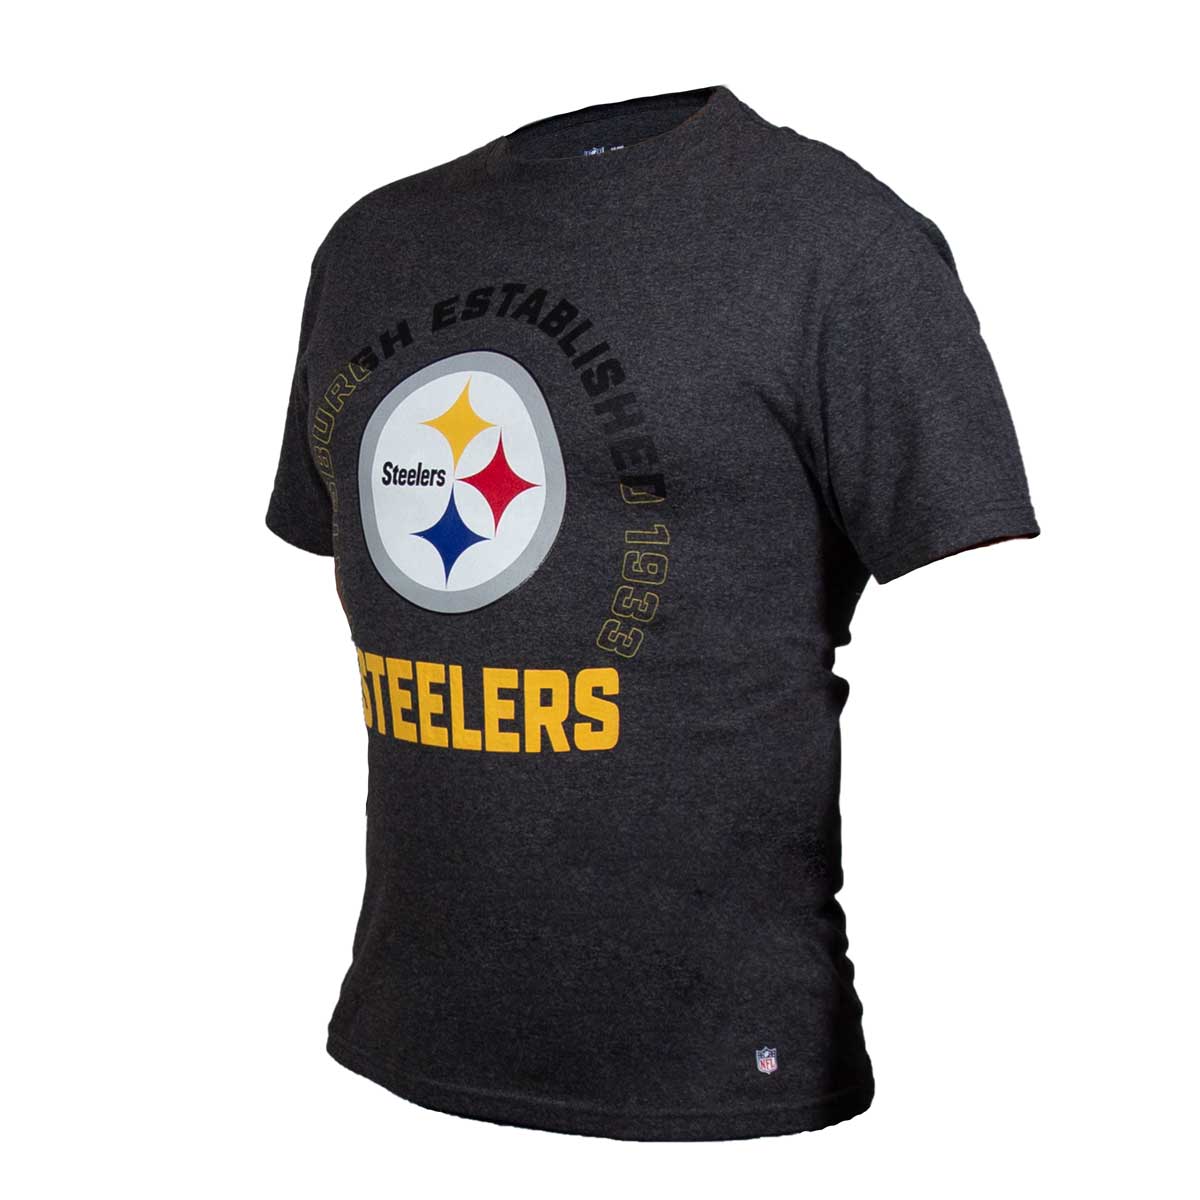 Playera Pittsburgh Steelers NFL Hombre 5632